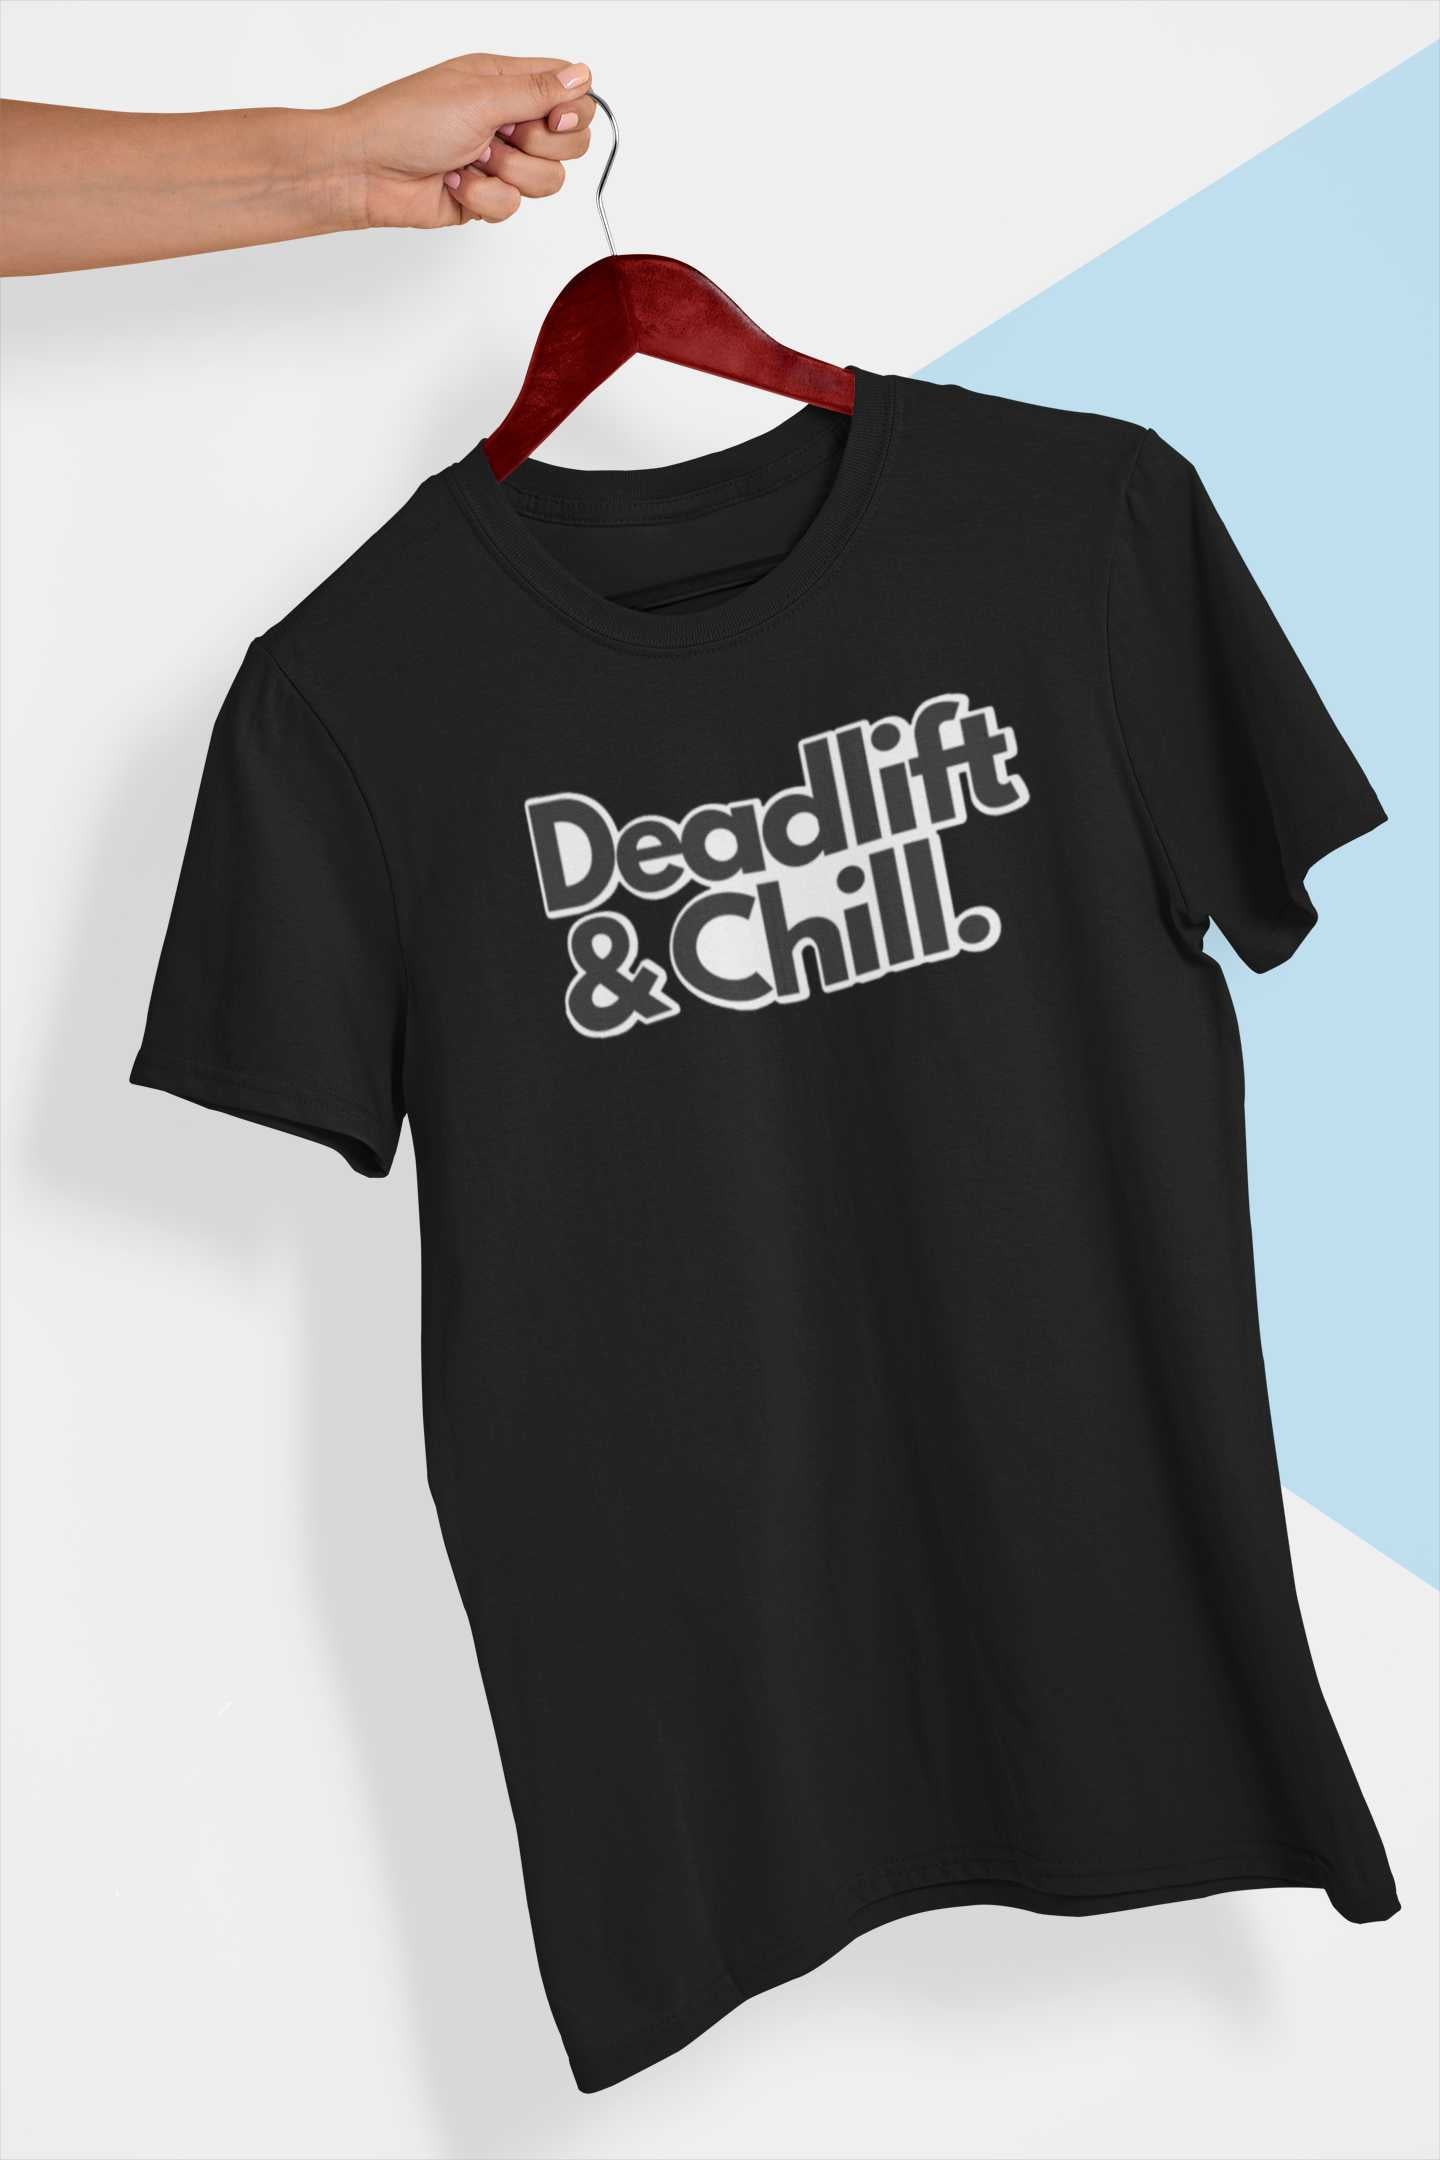 Deadlift And Chill - Gym T Shirt Strong Soul Shirts & Tops